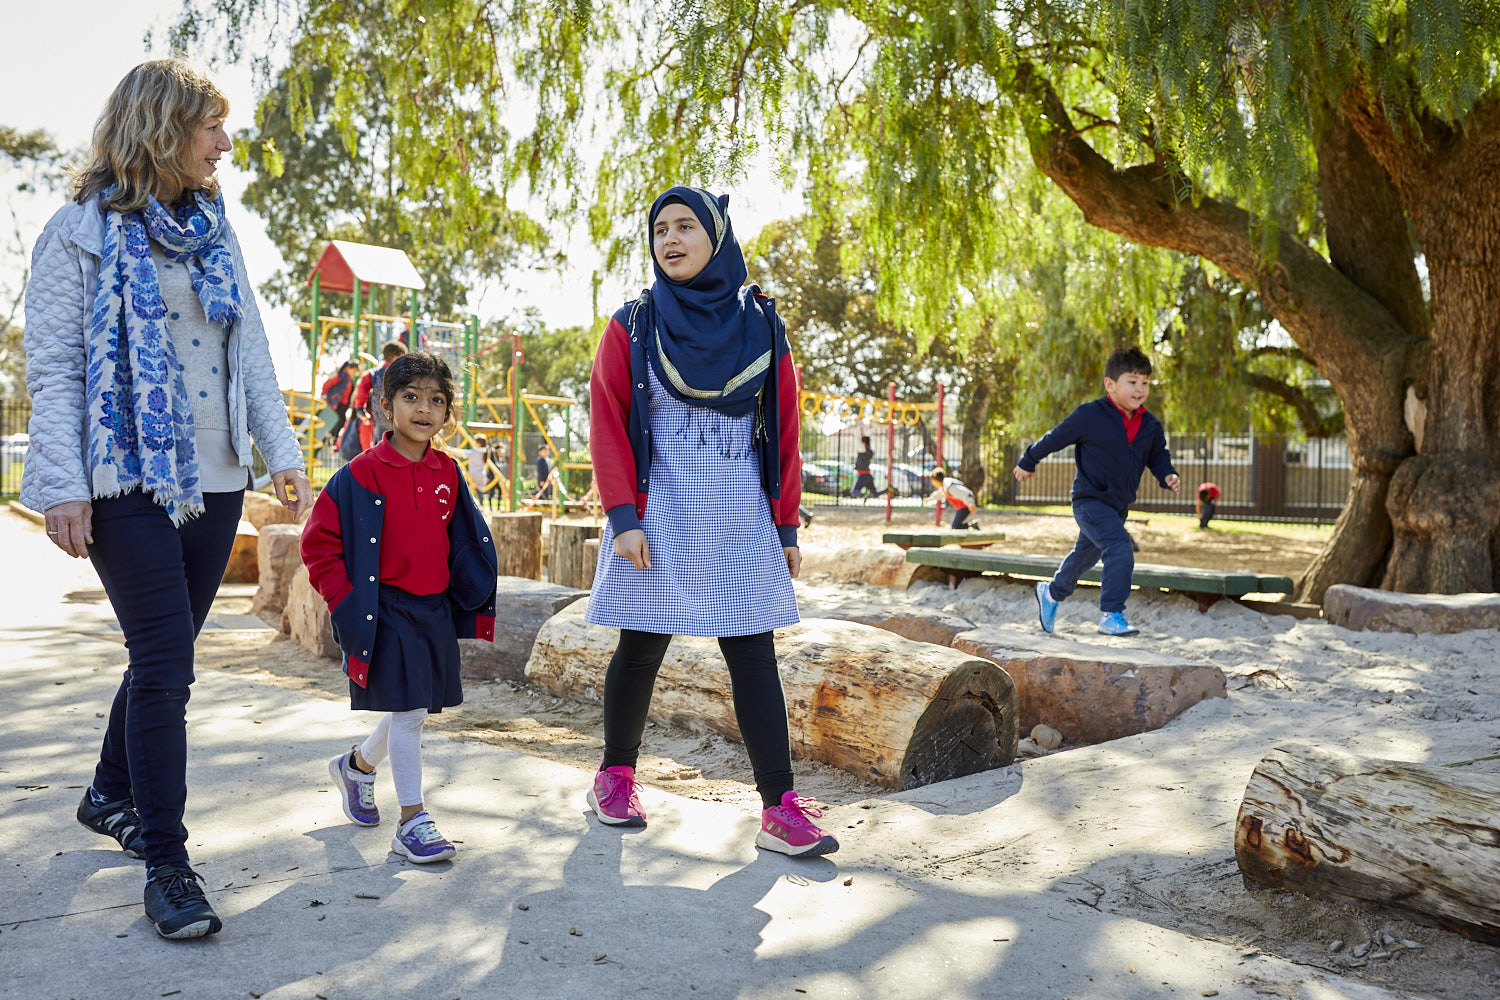 Two adults and a child, walking through a playground